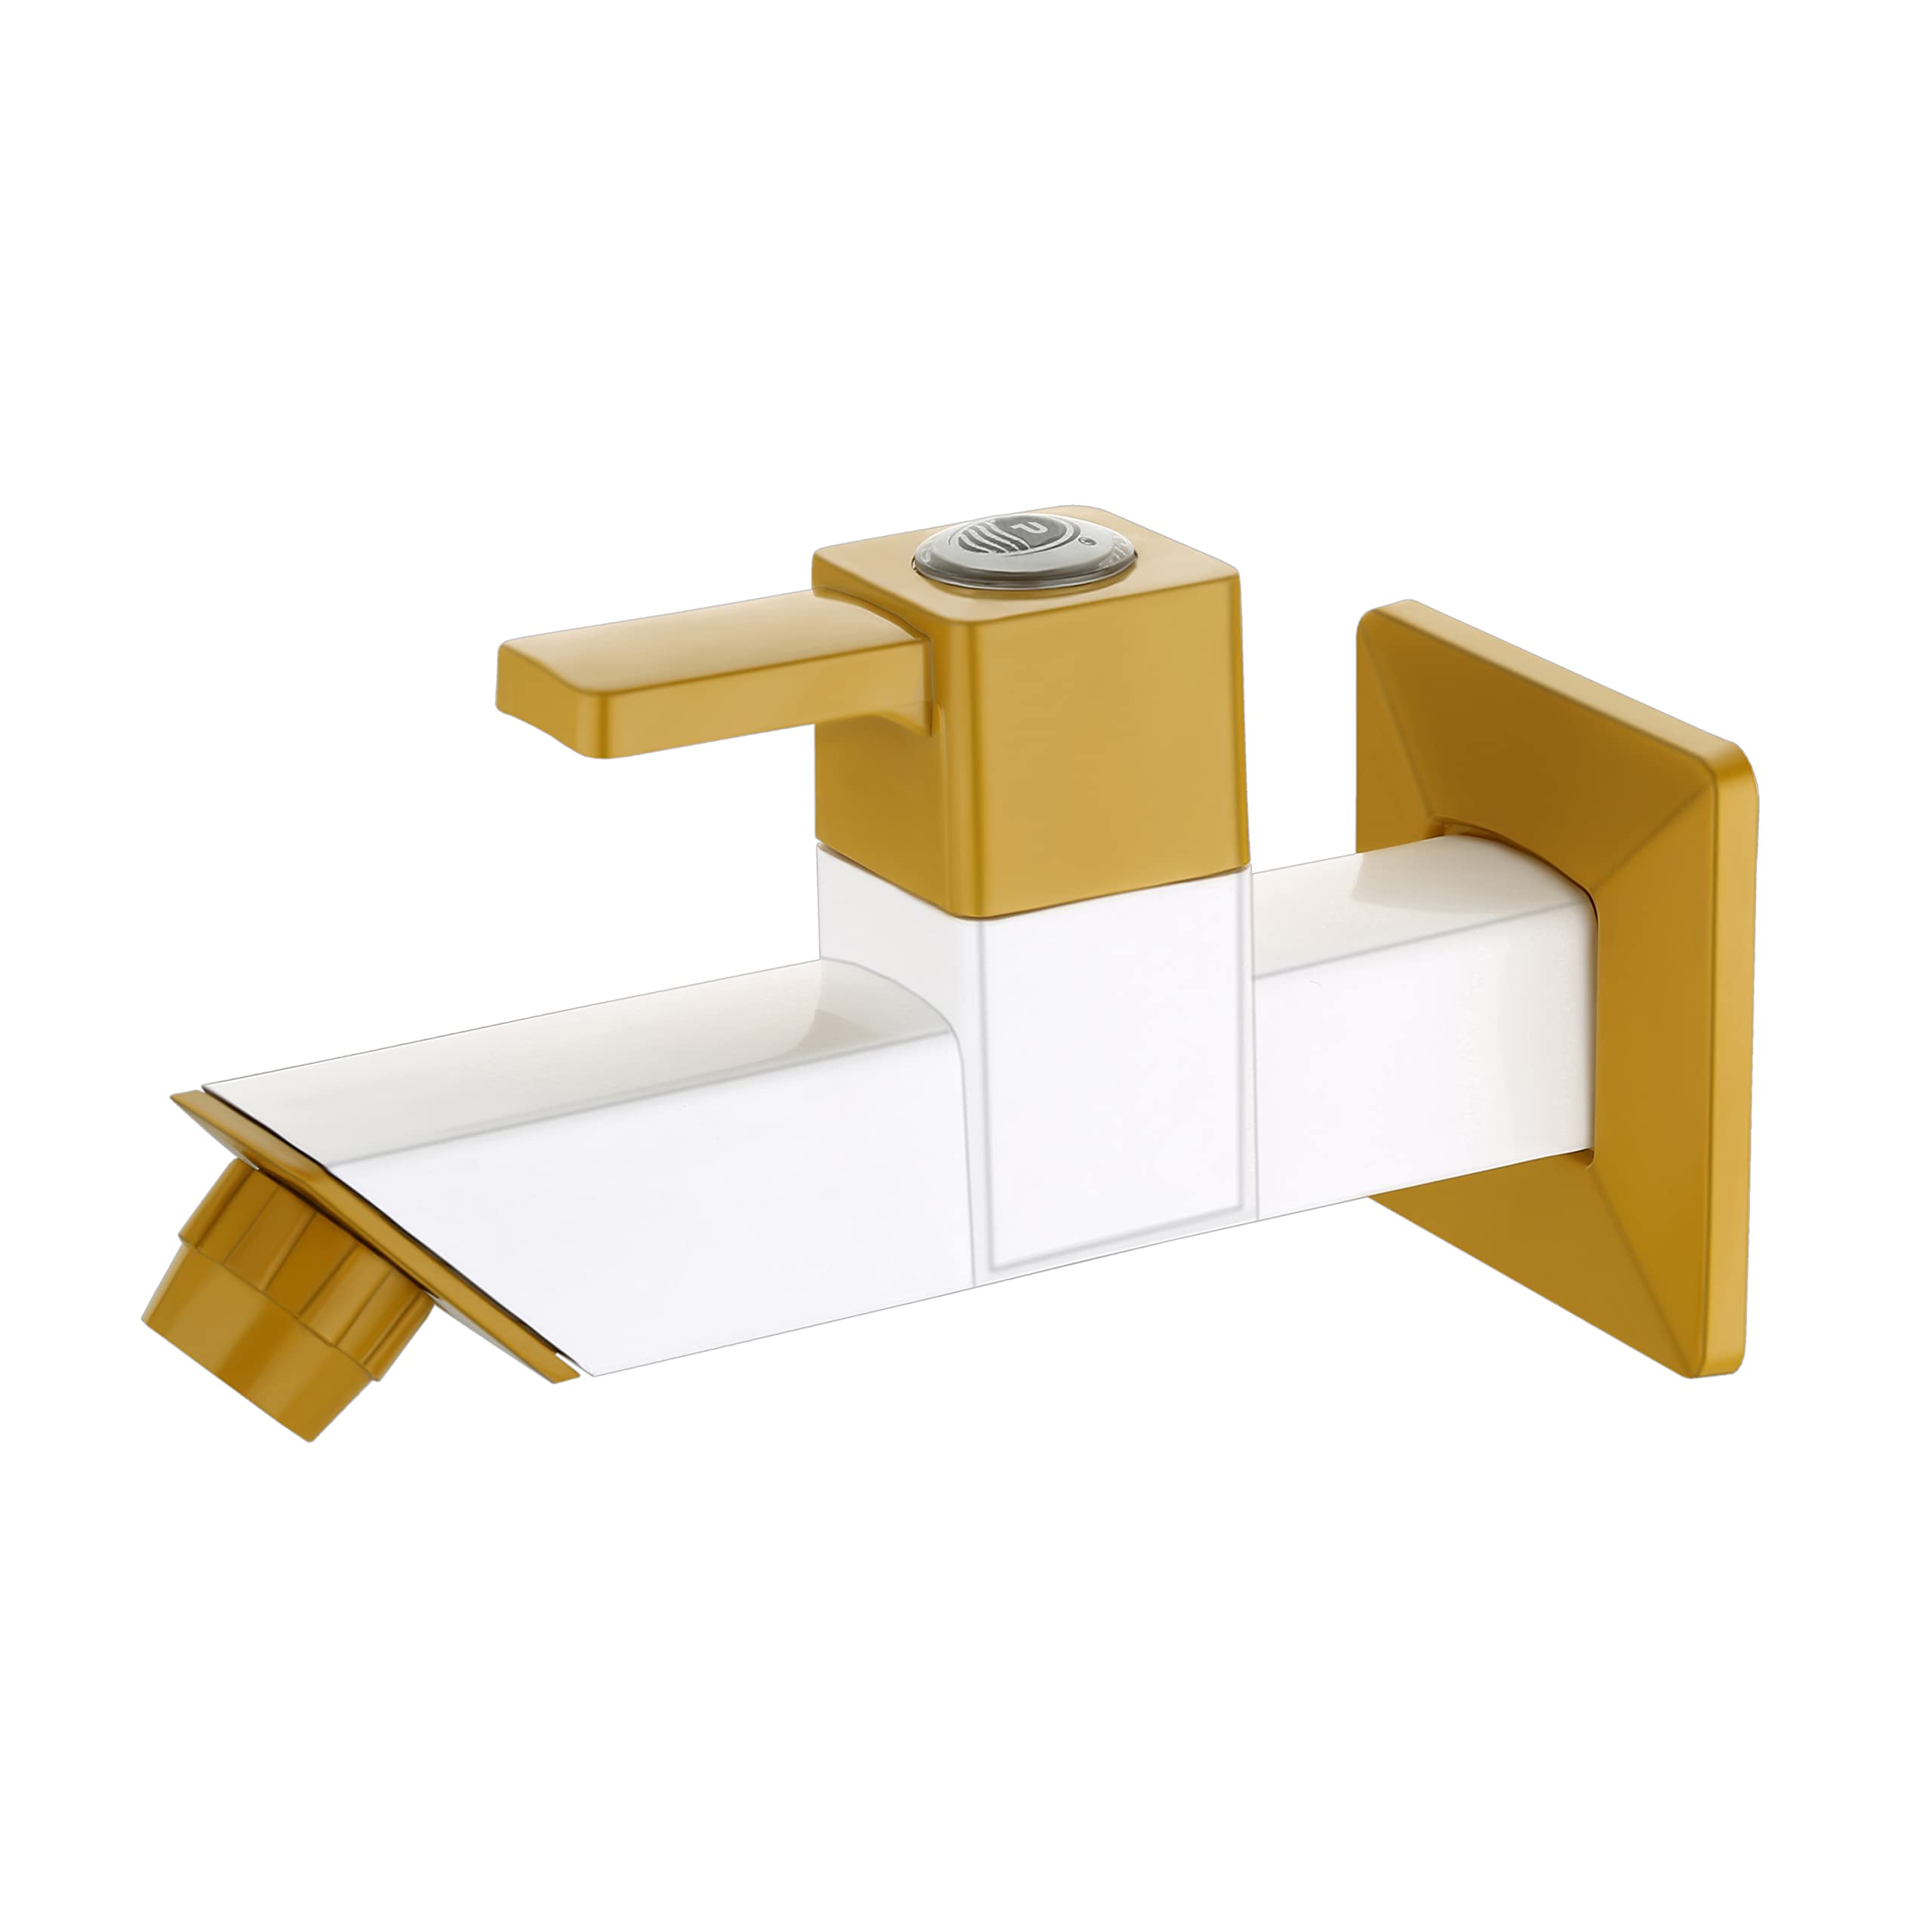 Primax PTMT EDS-122 Single Lever Bib Cock (Long Body) for Bathroom/Kitchen Sink Tap/Basin Faucet with Plastic Wall Flange - (Yellow & White)